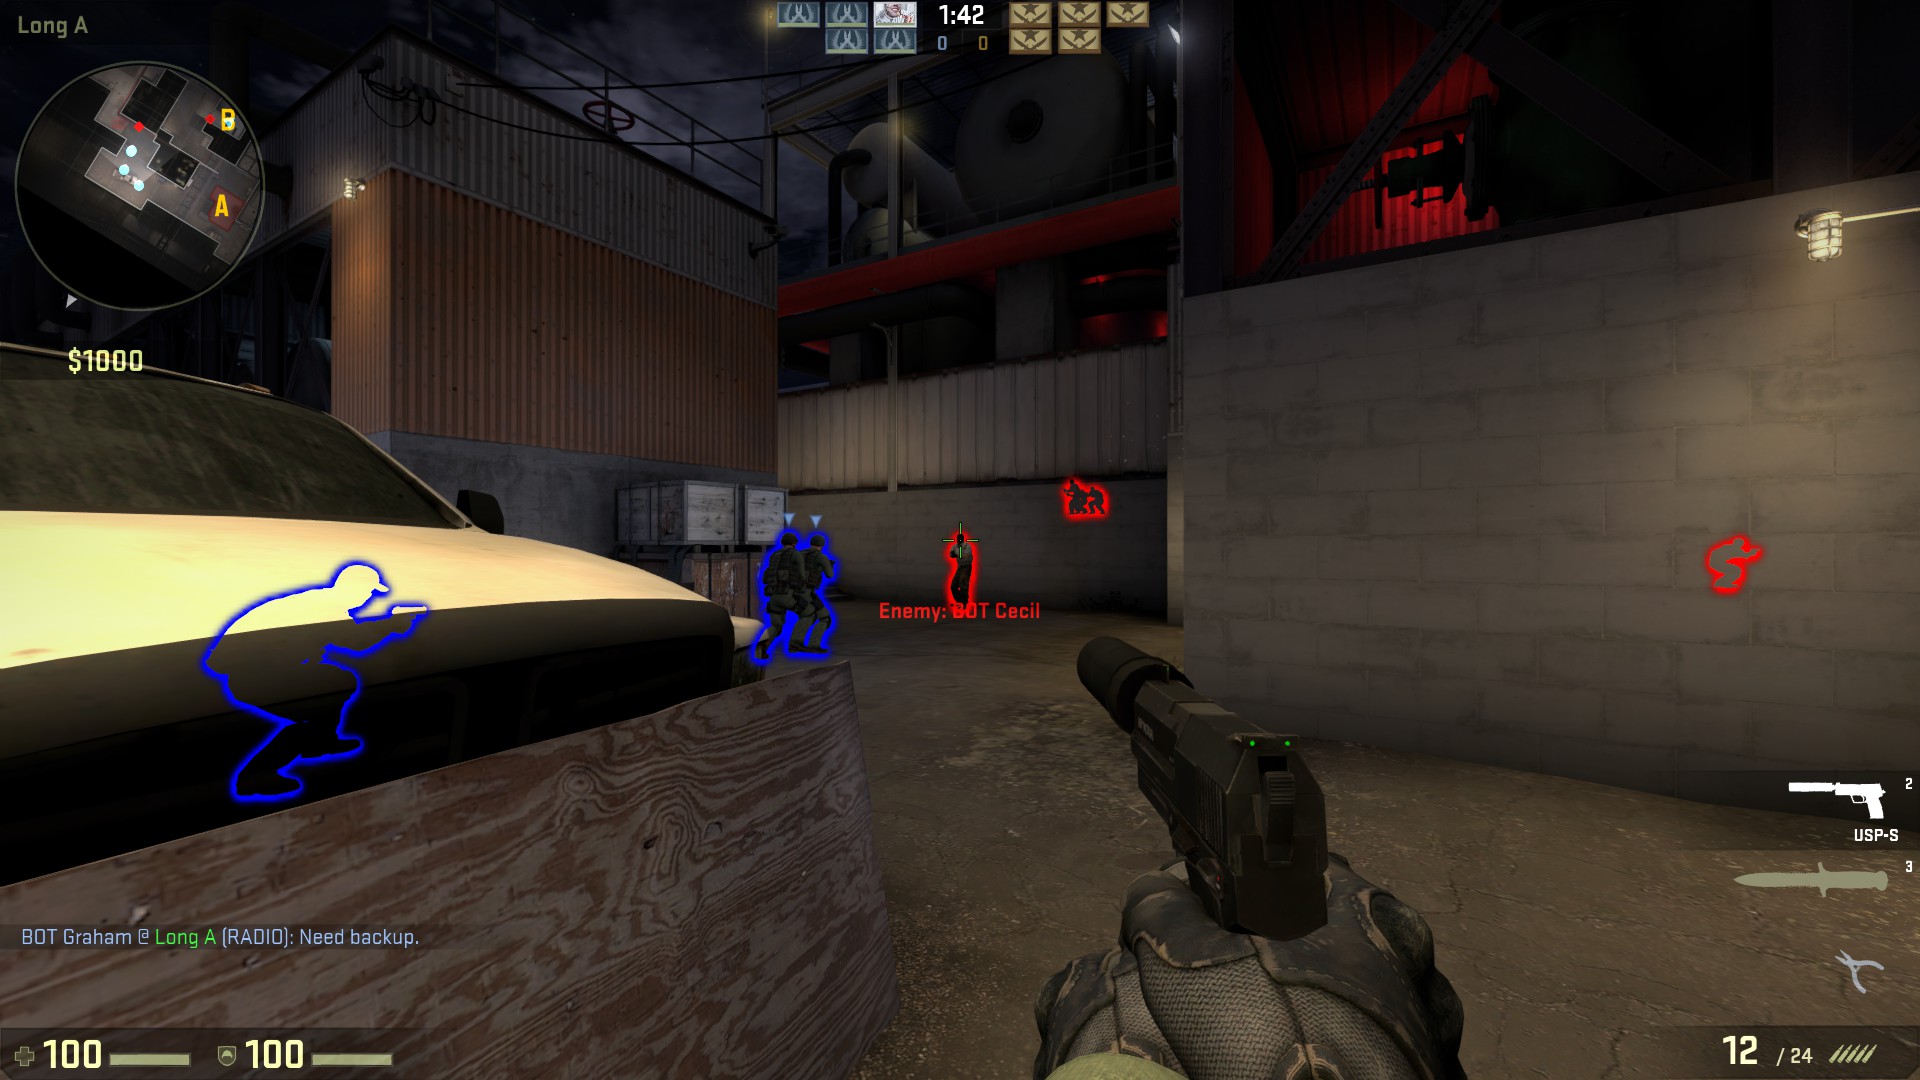 The aimbot mode in the SmurfWrecker csgo cheat / hack.